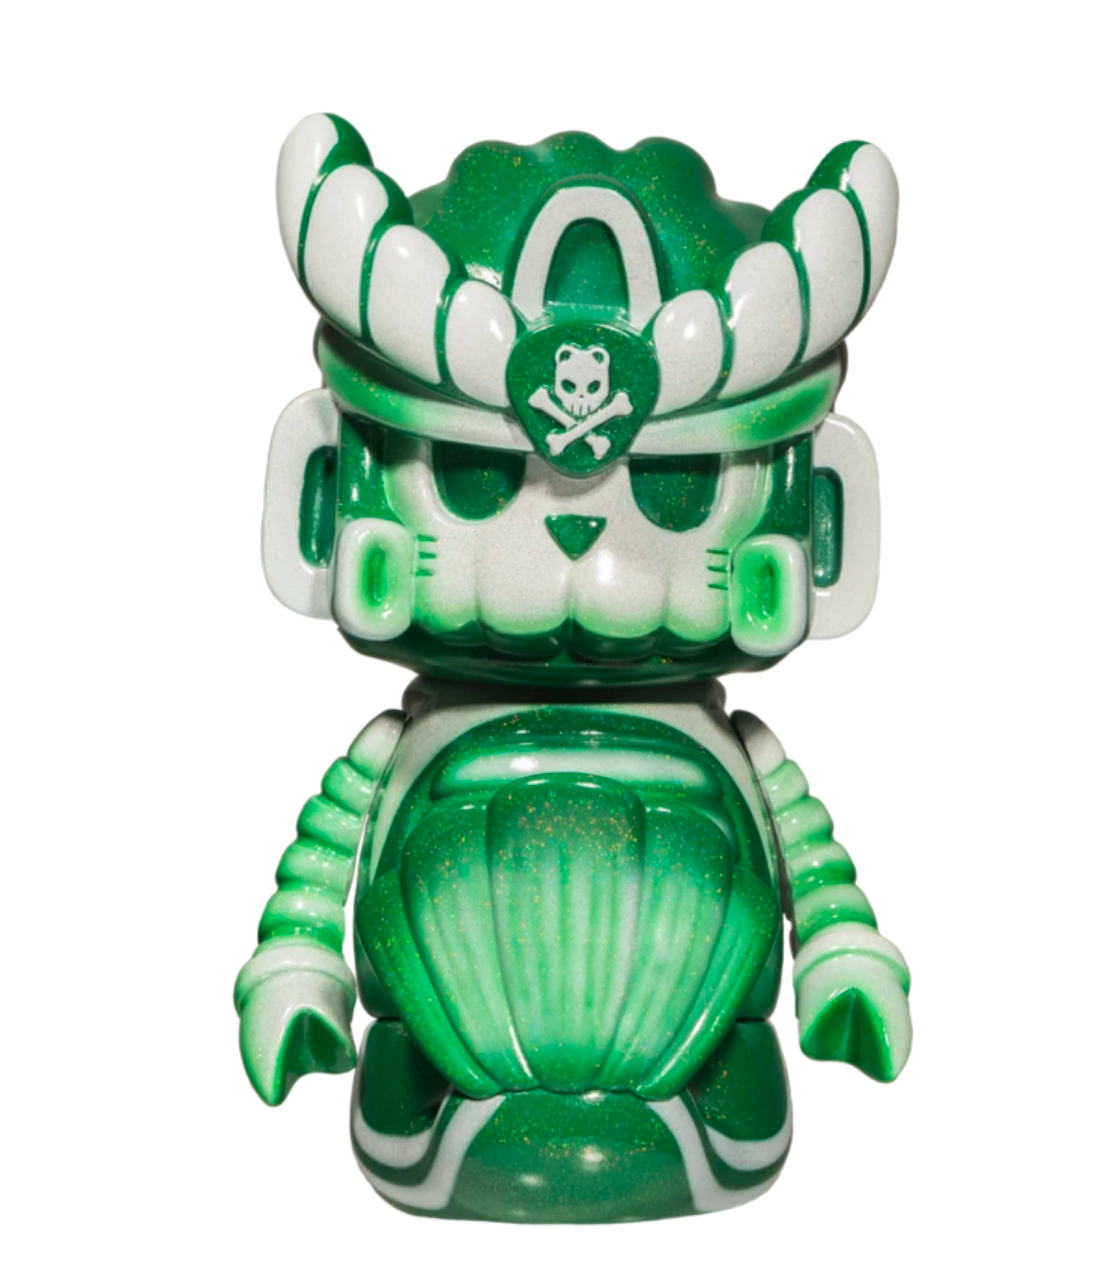 Quiccs MerTEQ Liat Orchard Green Edition 6-inch vinyl art toy by Mighty Jaxx Available Now ! ! !